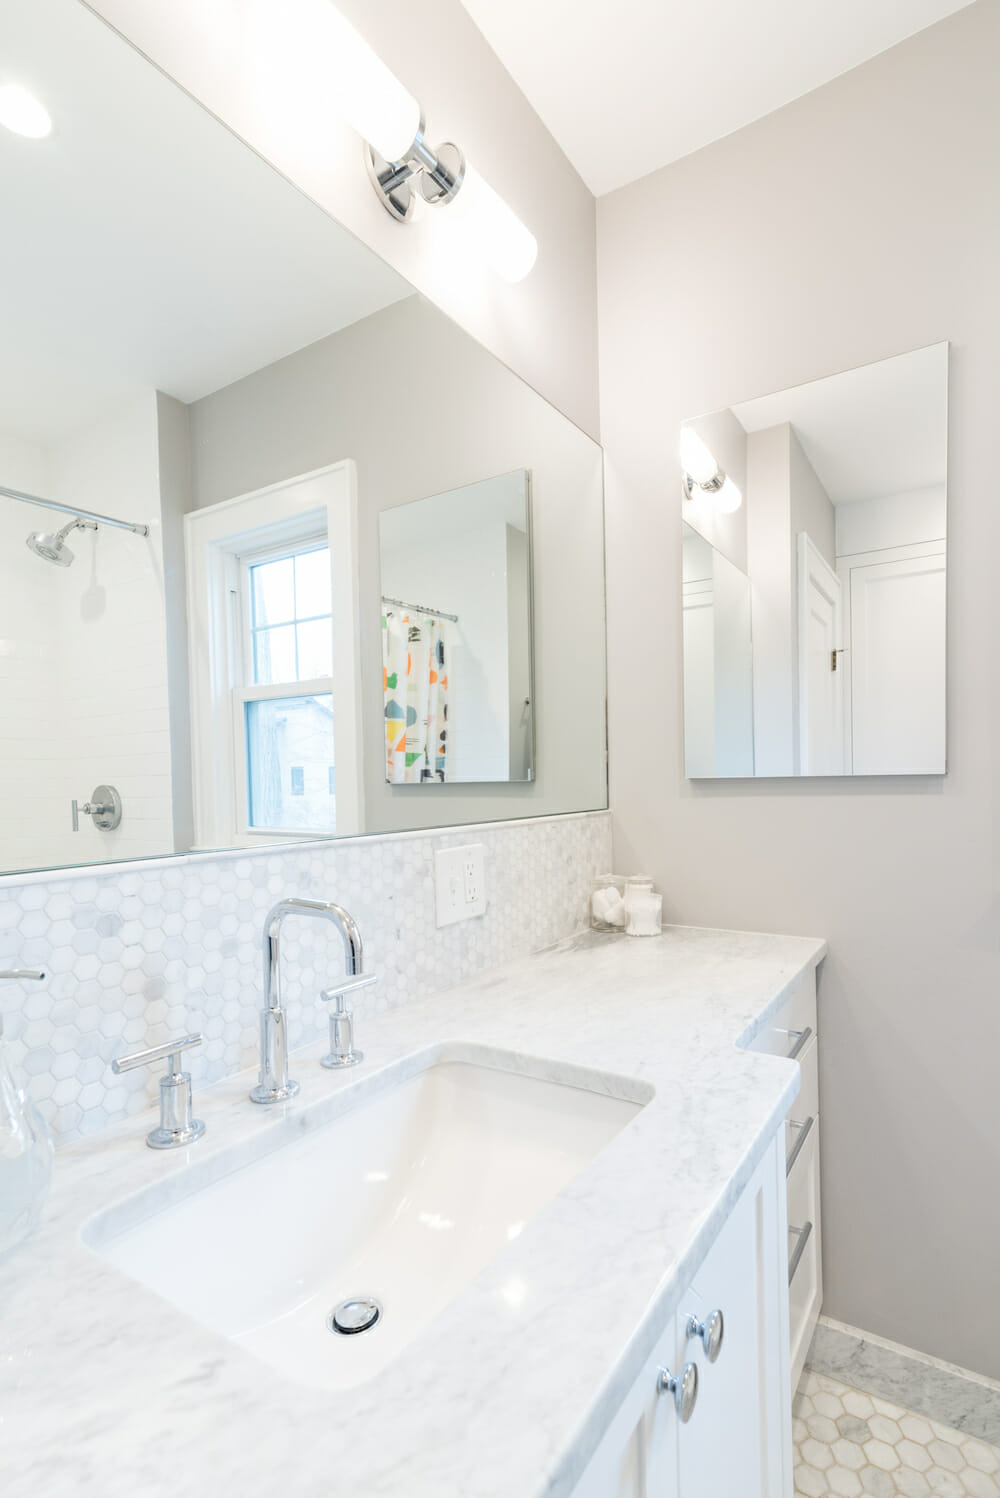 long bathroom mirror on a gray wall in a bathroom with white counter and sink after renovation  